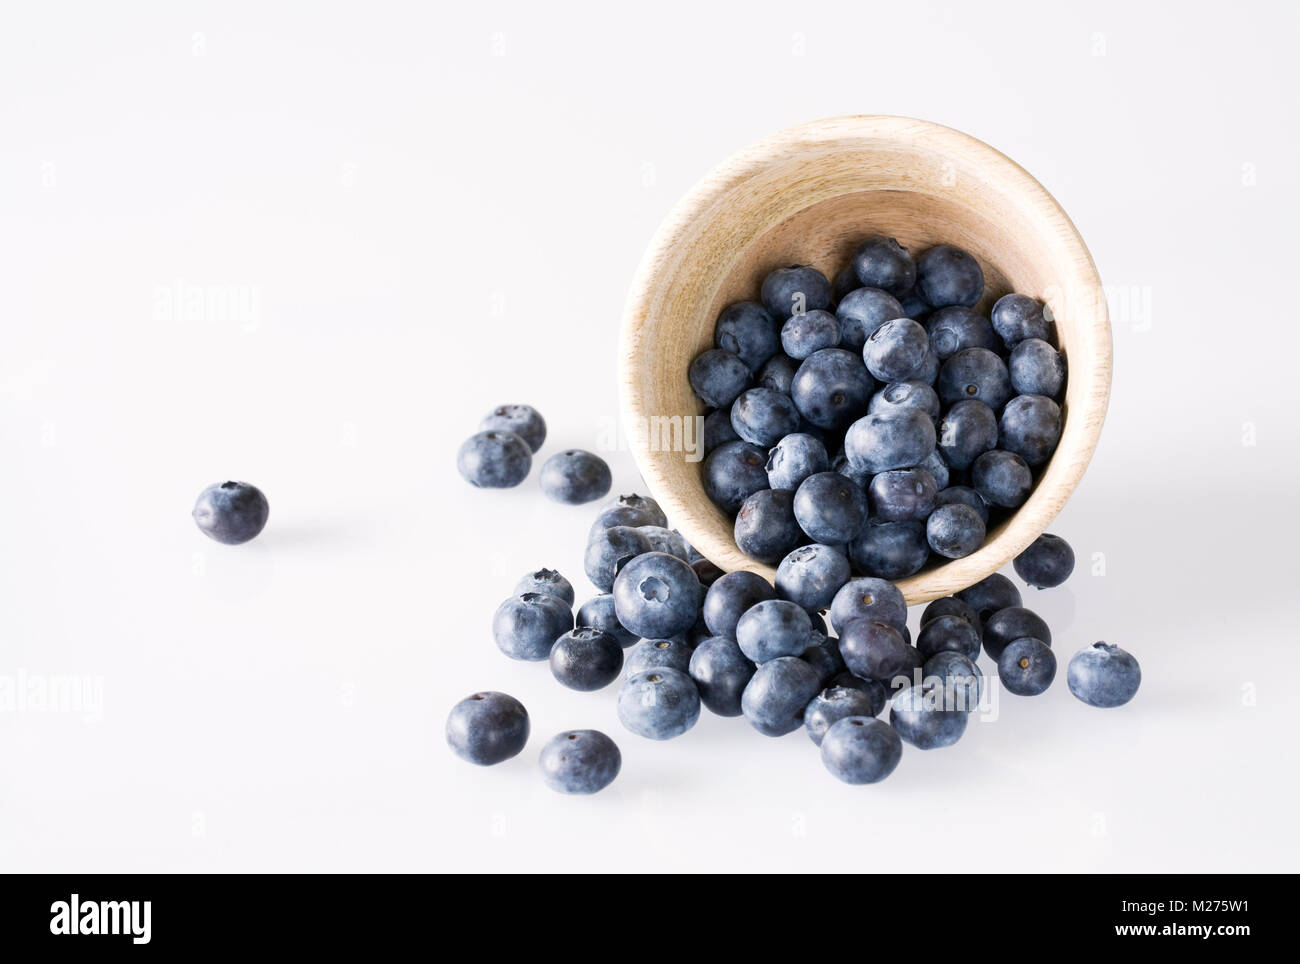 Vaccinium corymbosum. Blueberries in a wooden pot. Stock Photo